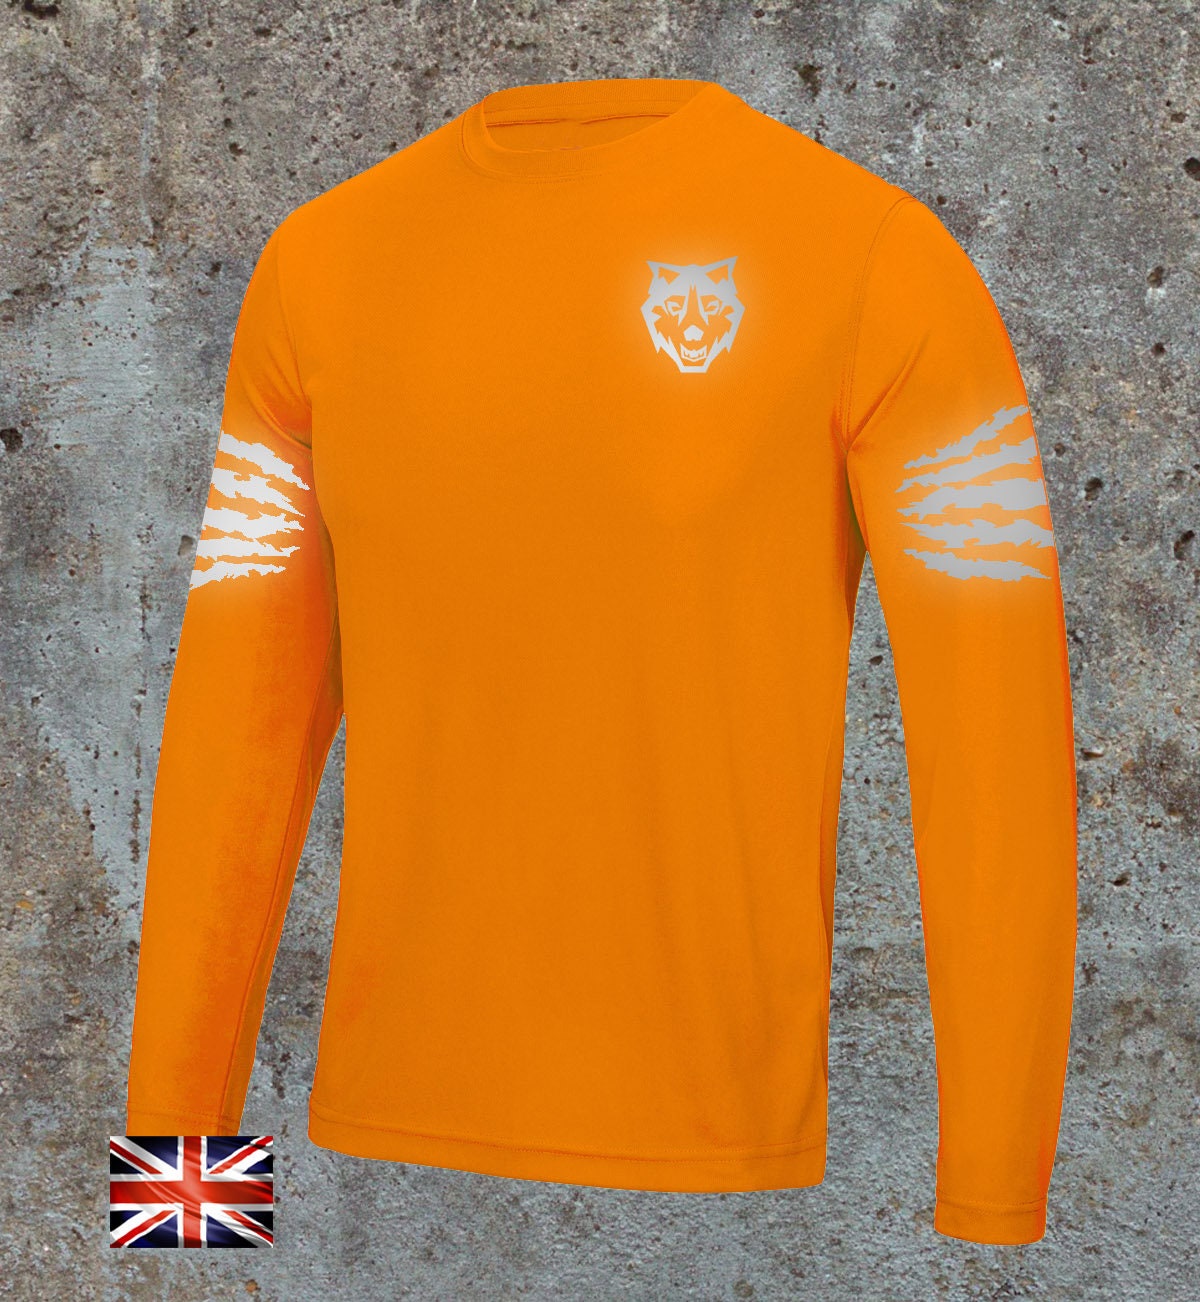 Reflective Hi Vis Long Sleeve Performance Top Ideal for Running